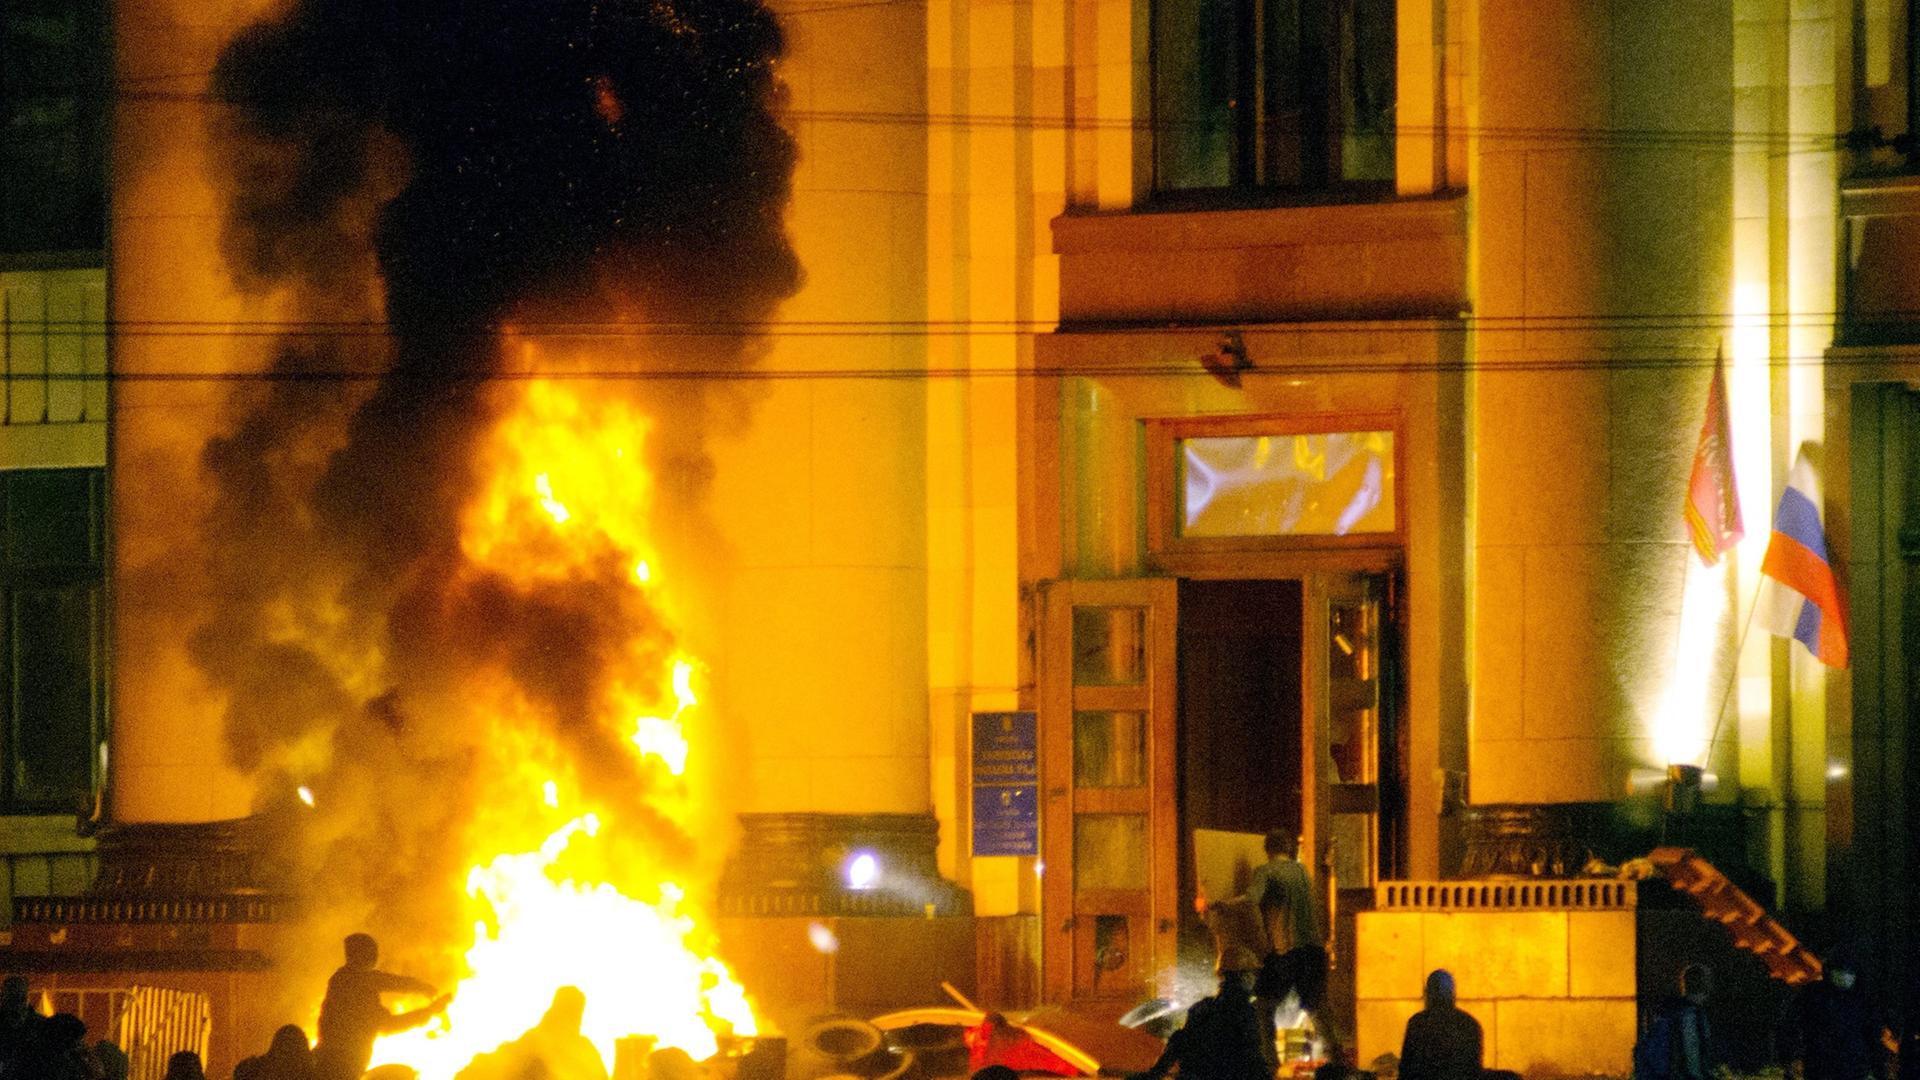 epa04158550 Pro-Russian protesters burn tires near of a regional administration building after police cleared it in Kharkiv, Ukraine, 07 April 2014. According to reports, pro-Russian demonstrators seized the administration building in Kharkiv at 06 April 